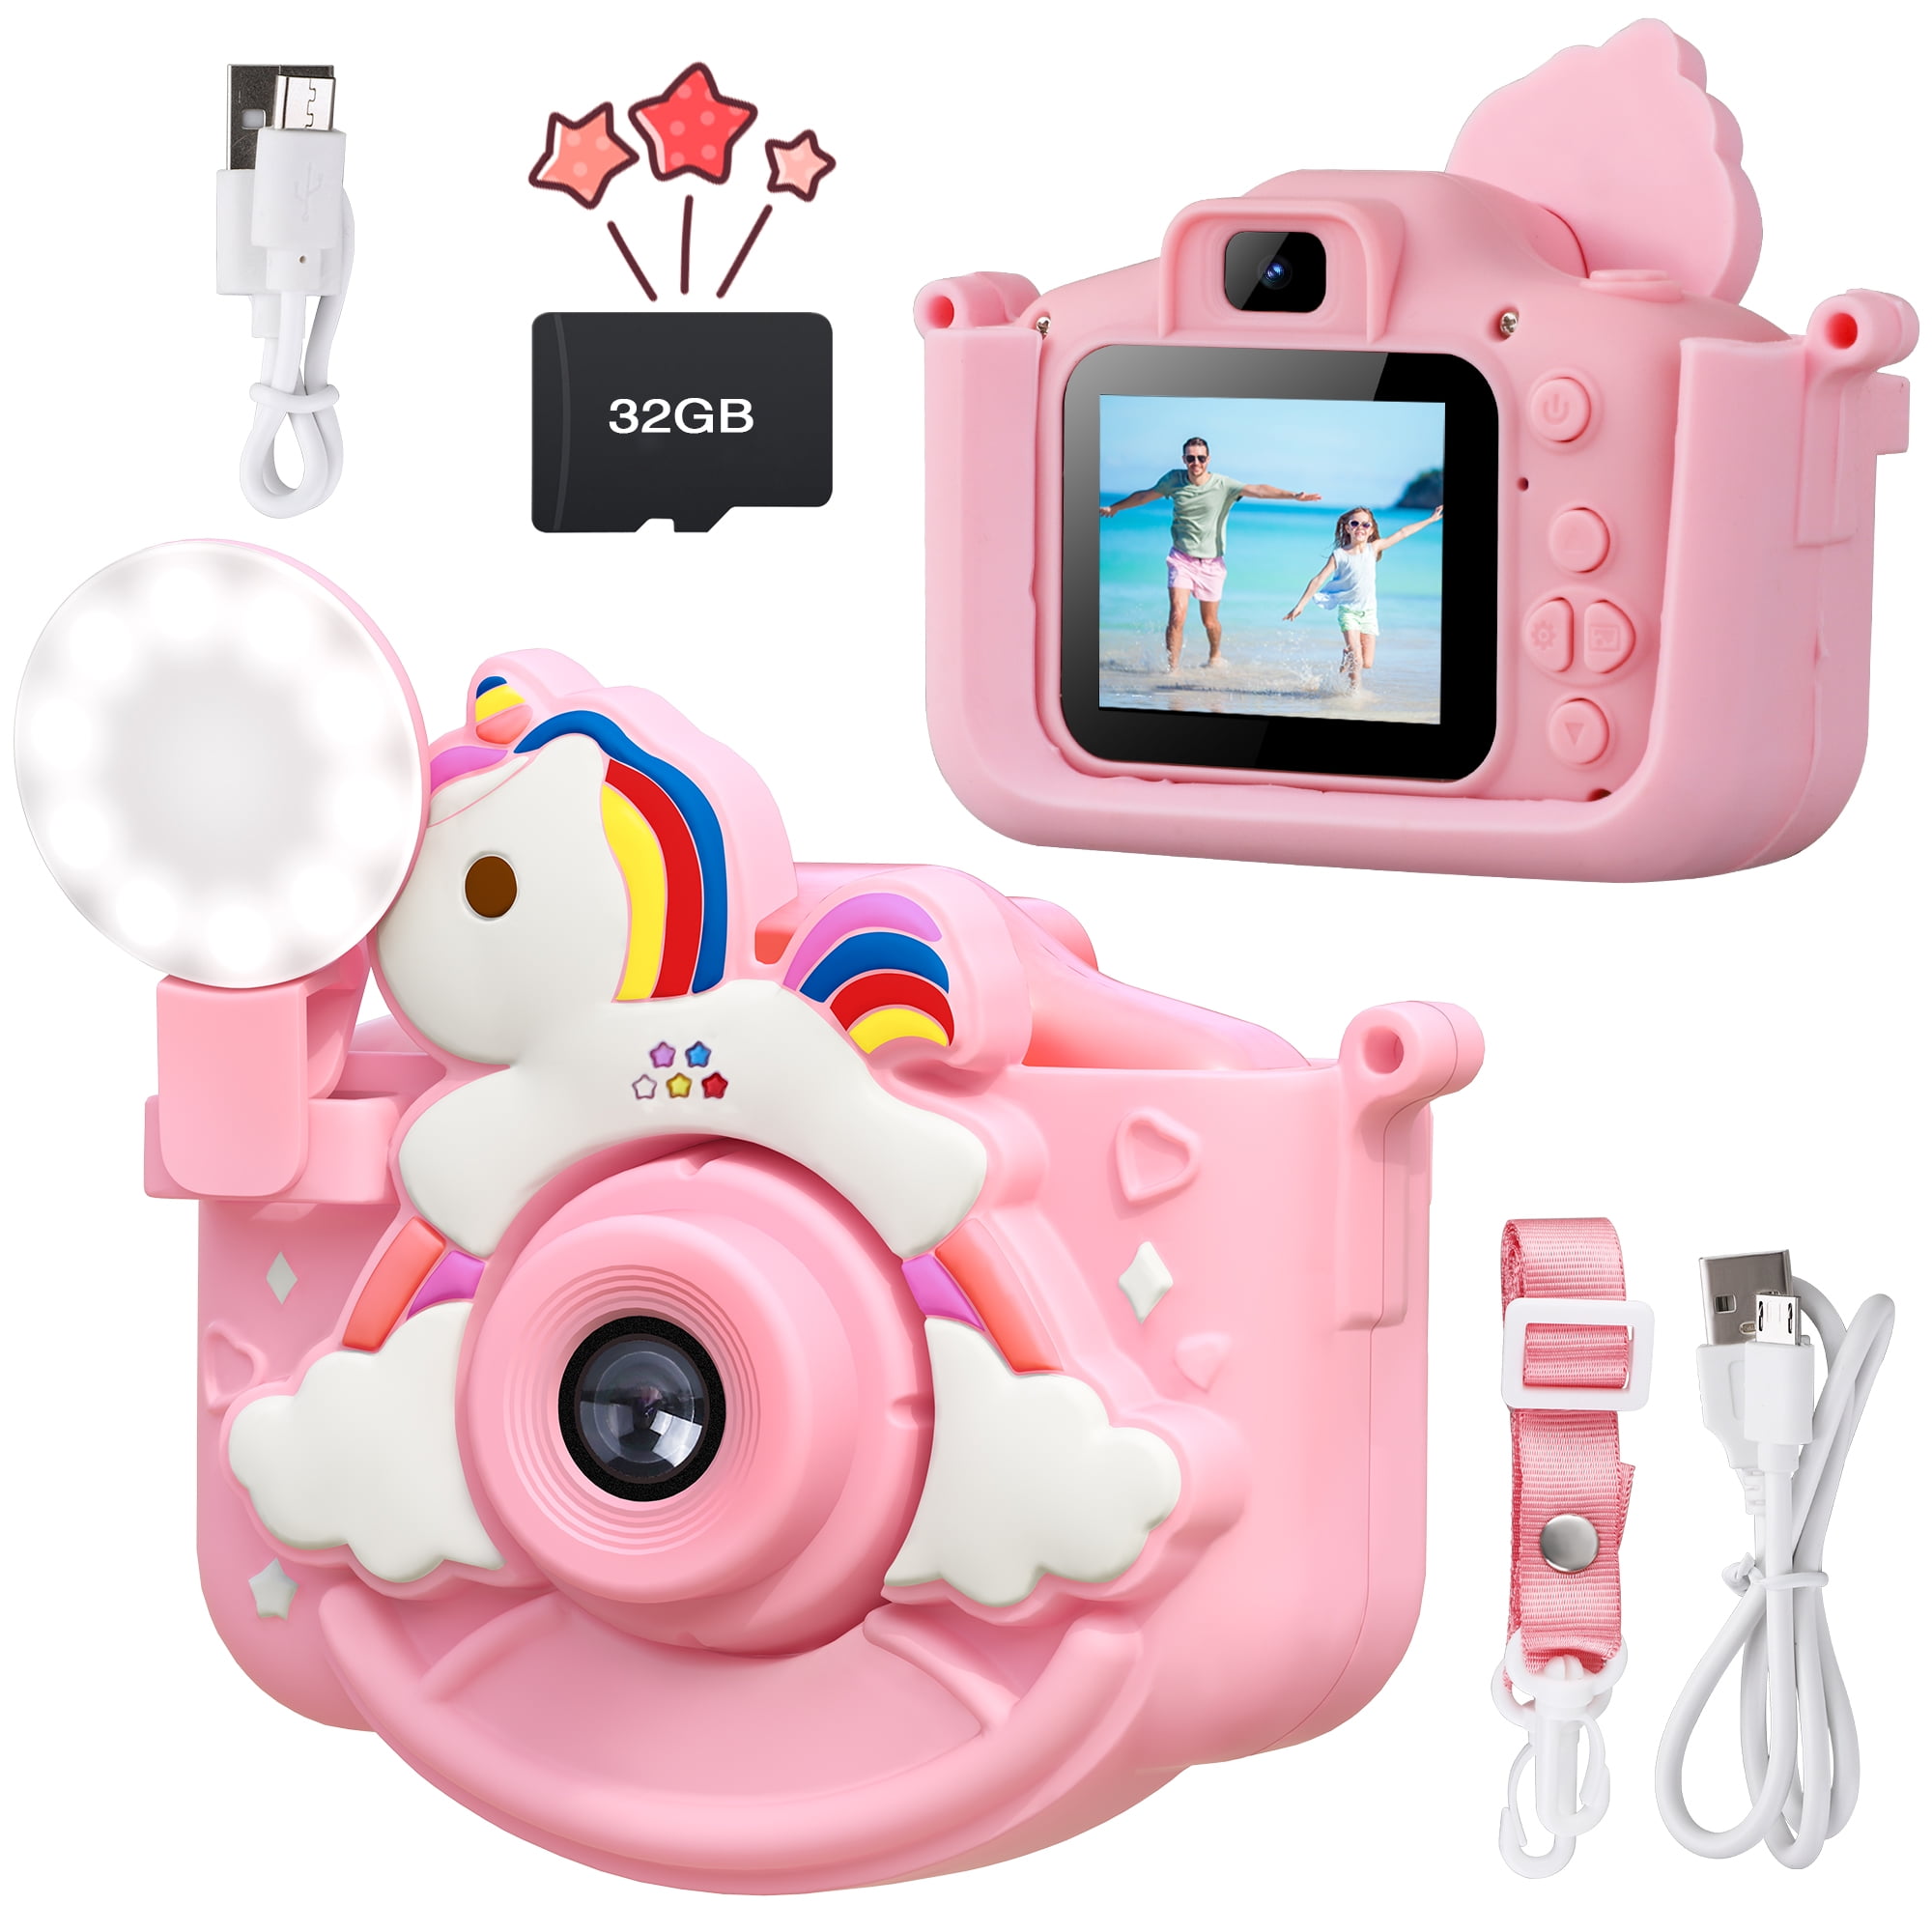 This highly-rated VTech kids camera is a bargain gift for budding  photographers on Cyber Monday